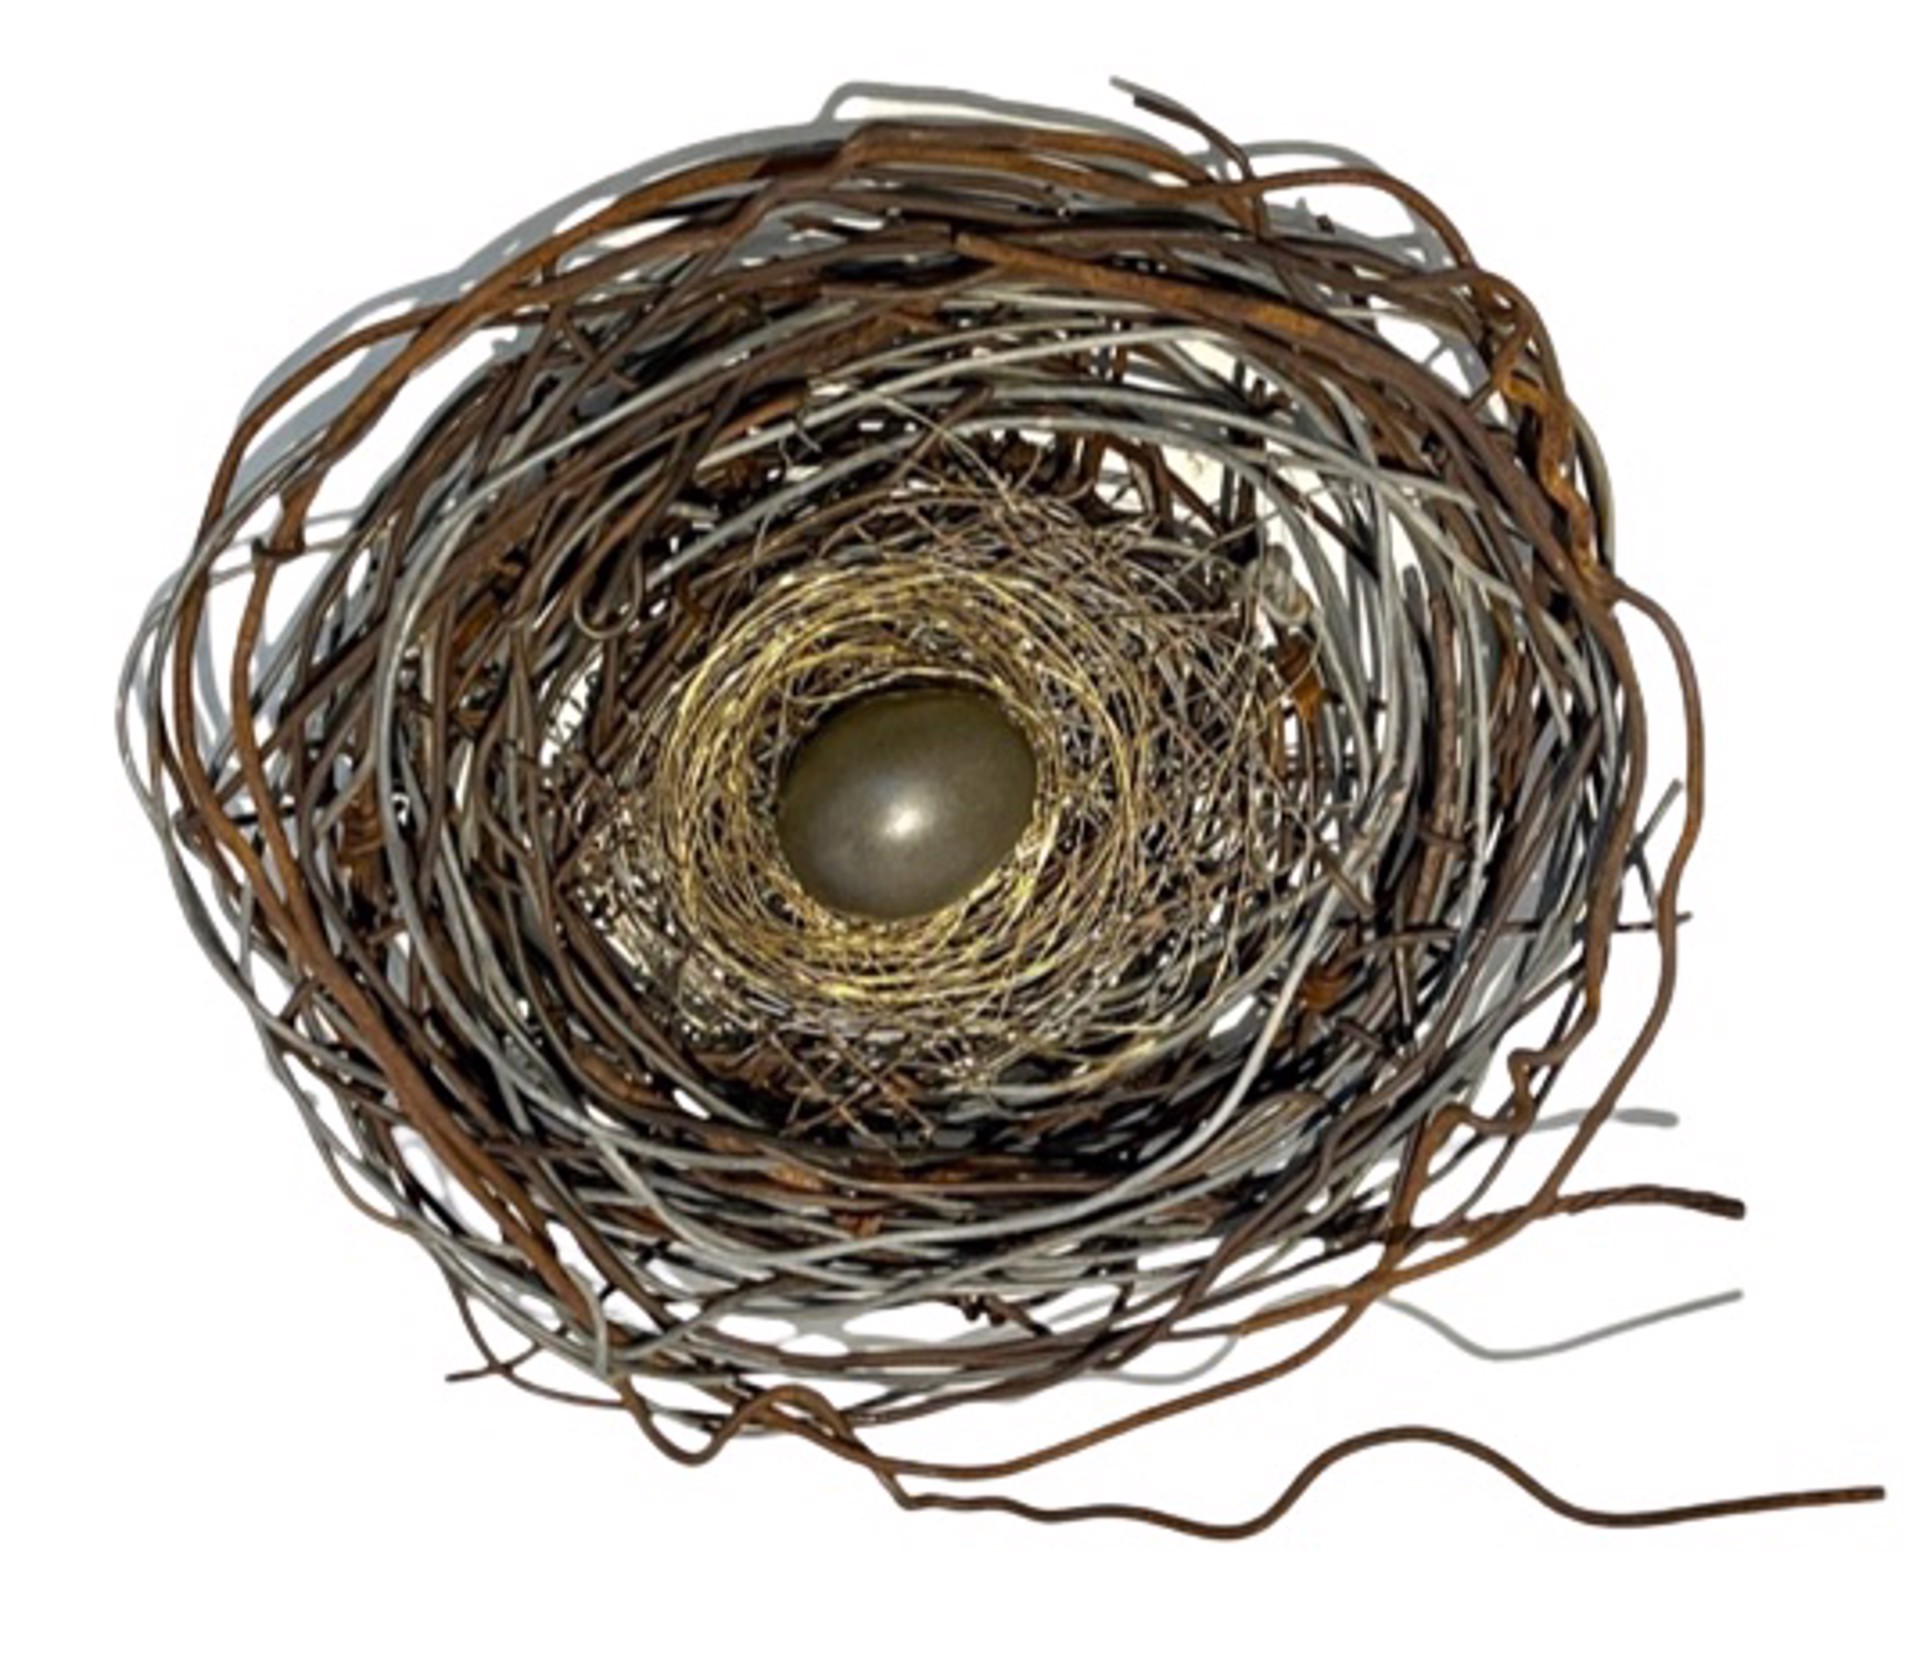 Hand Woven Wire Nest with 1 Single Grey Egg-gold wire inside #1272 by Phil Lichtenhan